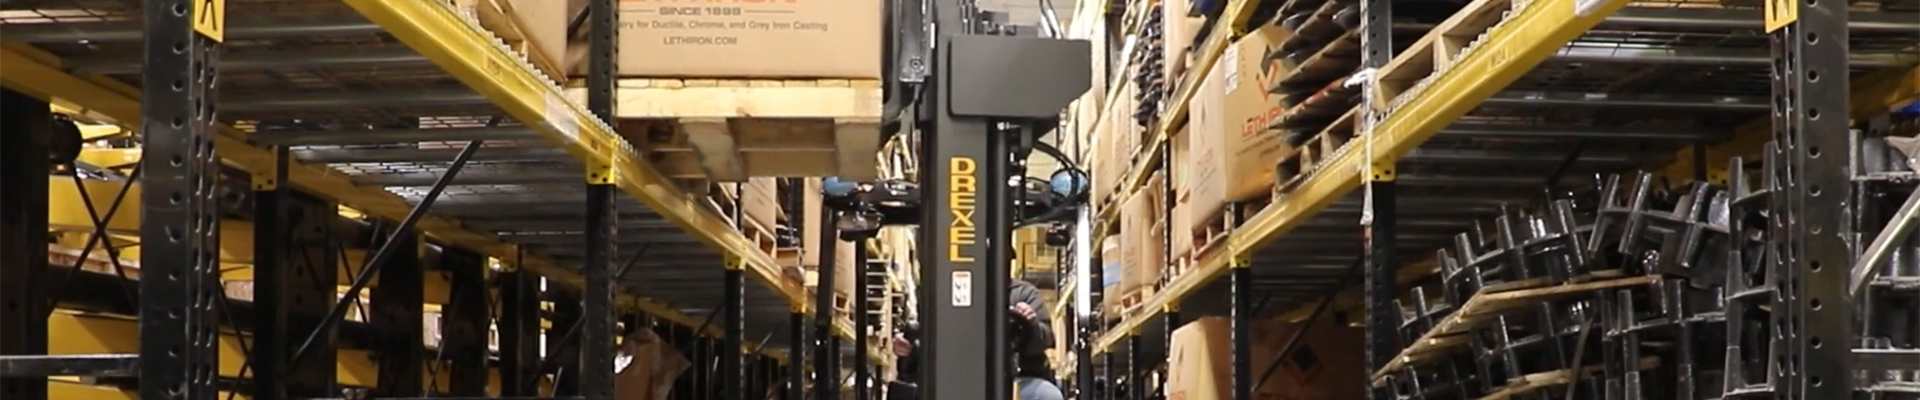 Drexel forklift in a warehouse